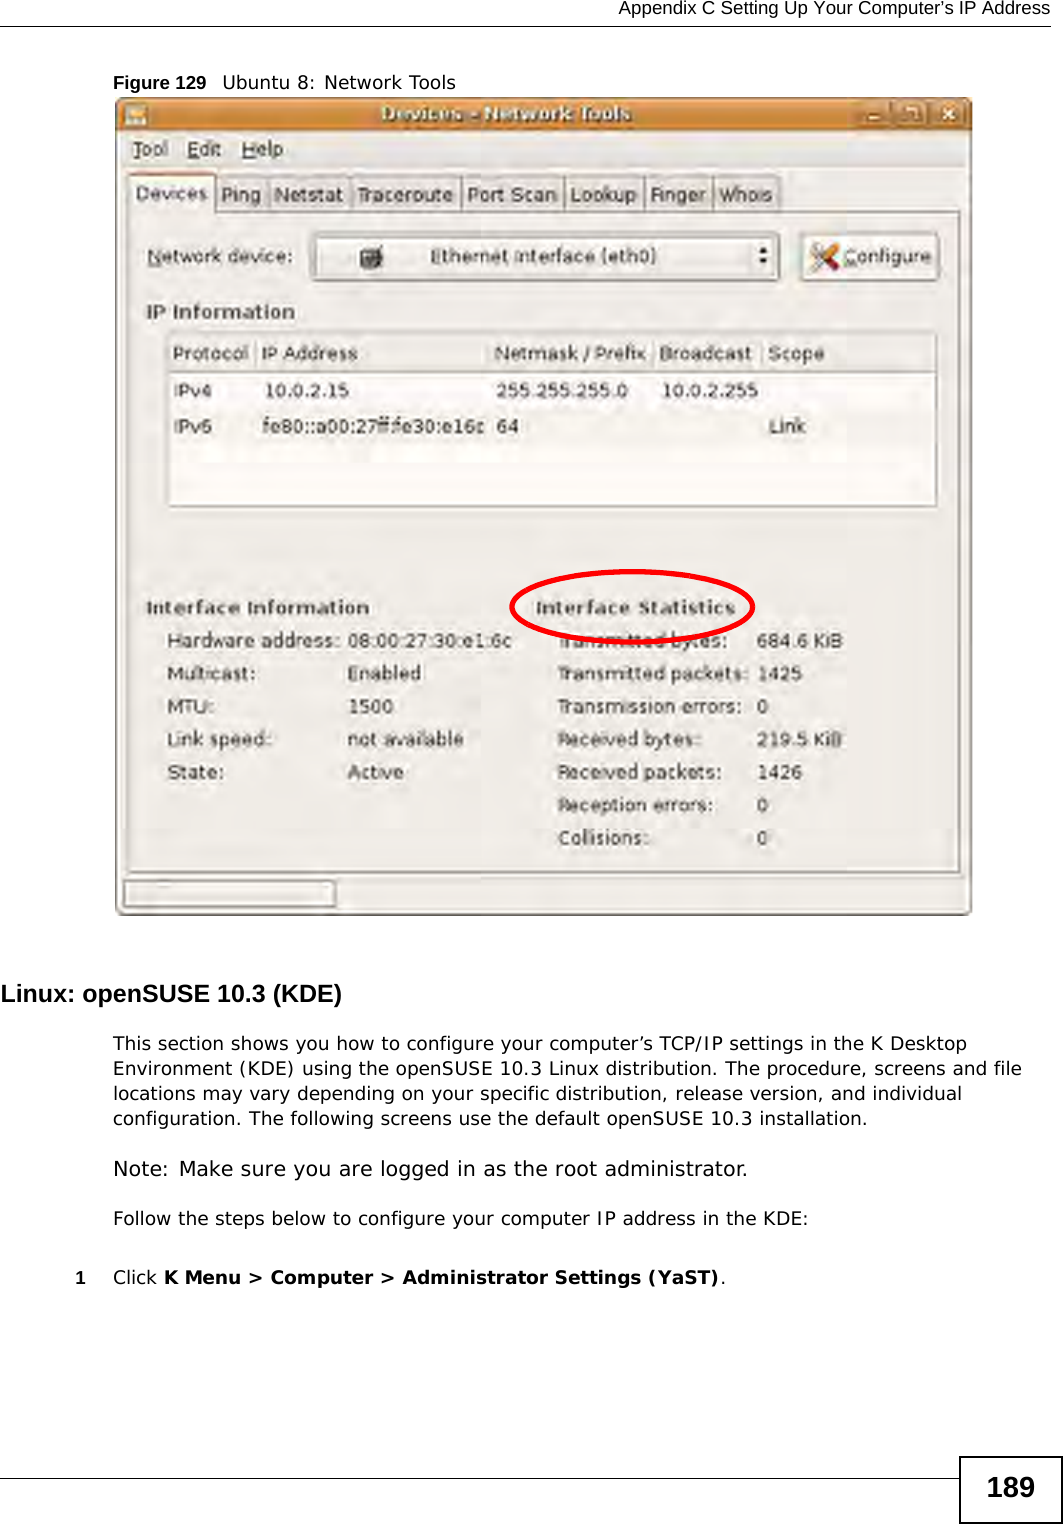  Appendix C Setting Up Your Computer’s IP Address189Figure 129   Ubuntu 8: Network ToolsLinux: openSUSE 10.3 (KDE)This section shows you how to configure your computer’s TCP/IP settings in the K Desktop Environment (KDE) using the openSUSE 10.3 Linux distribution. The procedure, screens and file locations may vary depending on your specific distribution, release version, and individual configuration. The following screens use the default openSUSE 10.3 installation.Note: Make sure you are logged in as the root administrator. Follow the steps below to configure your computer IP address in the KDE:1Click K Menu &gt; Computer &gt; Administrator Settings (YaST).